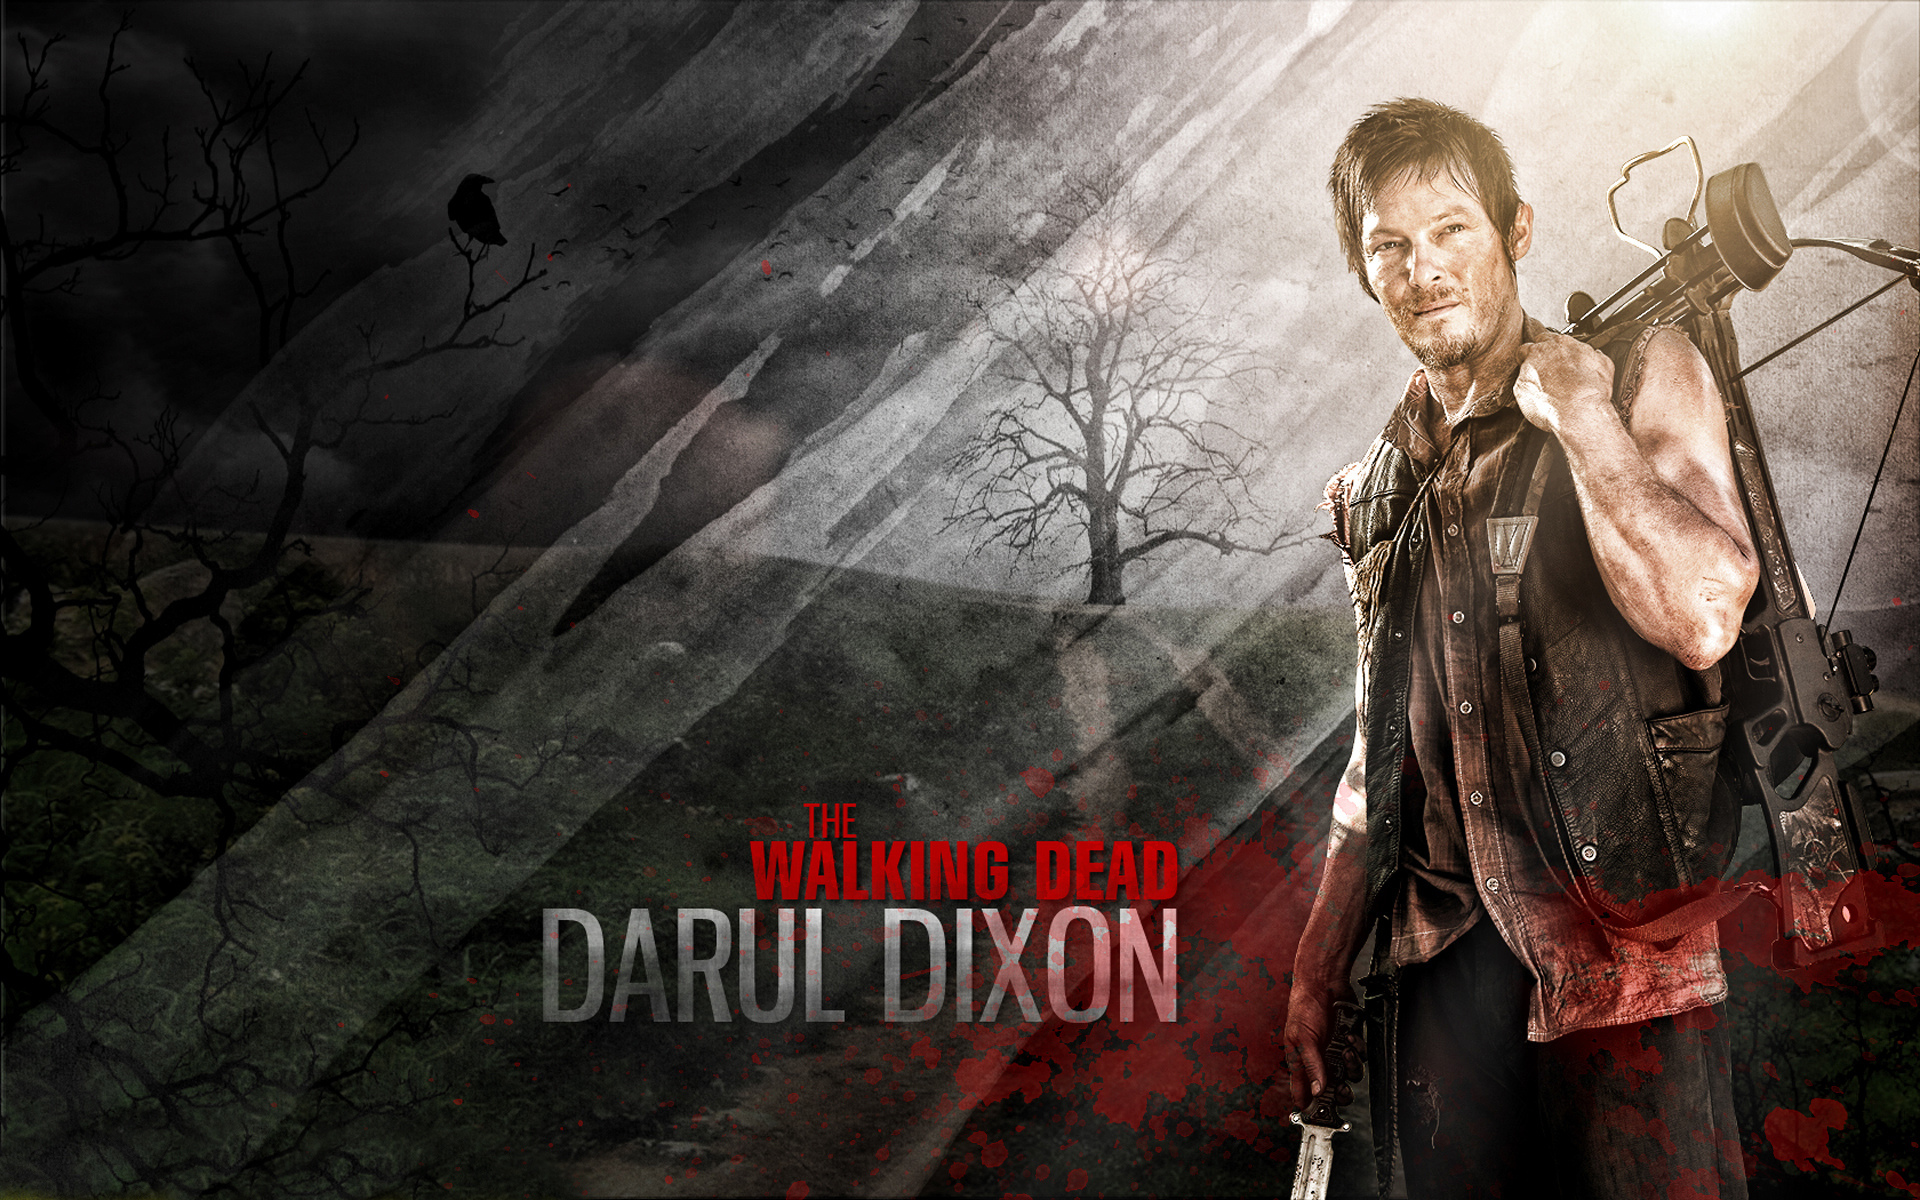 the walking dead wallpaper,movie,photography,digital compositing,action film,album cover